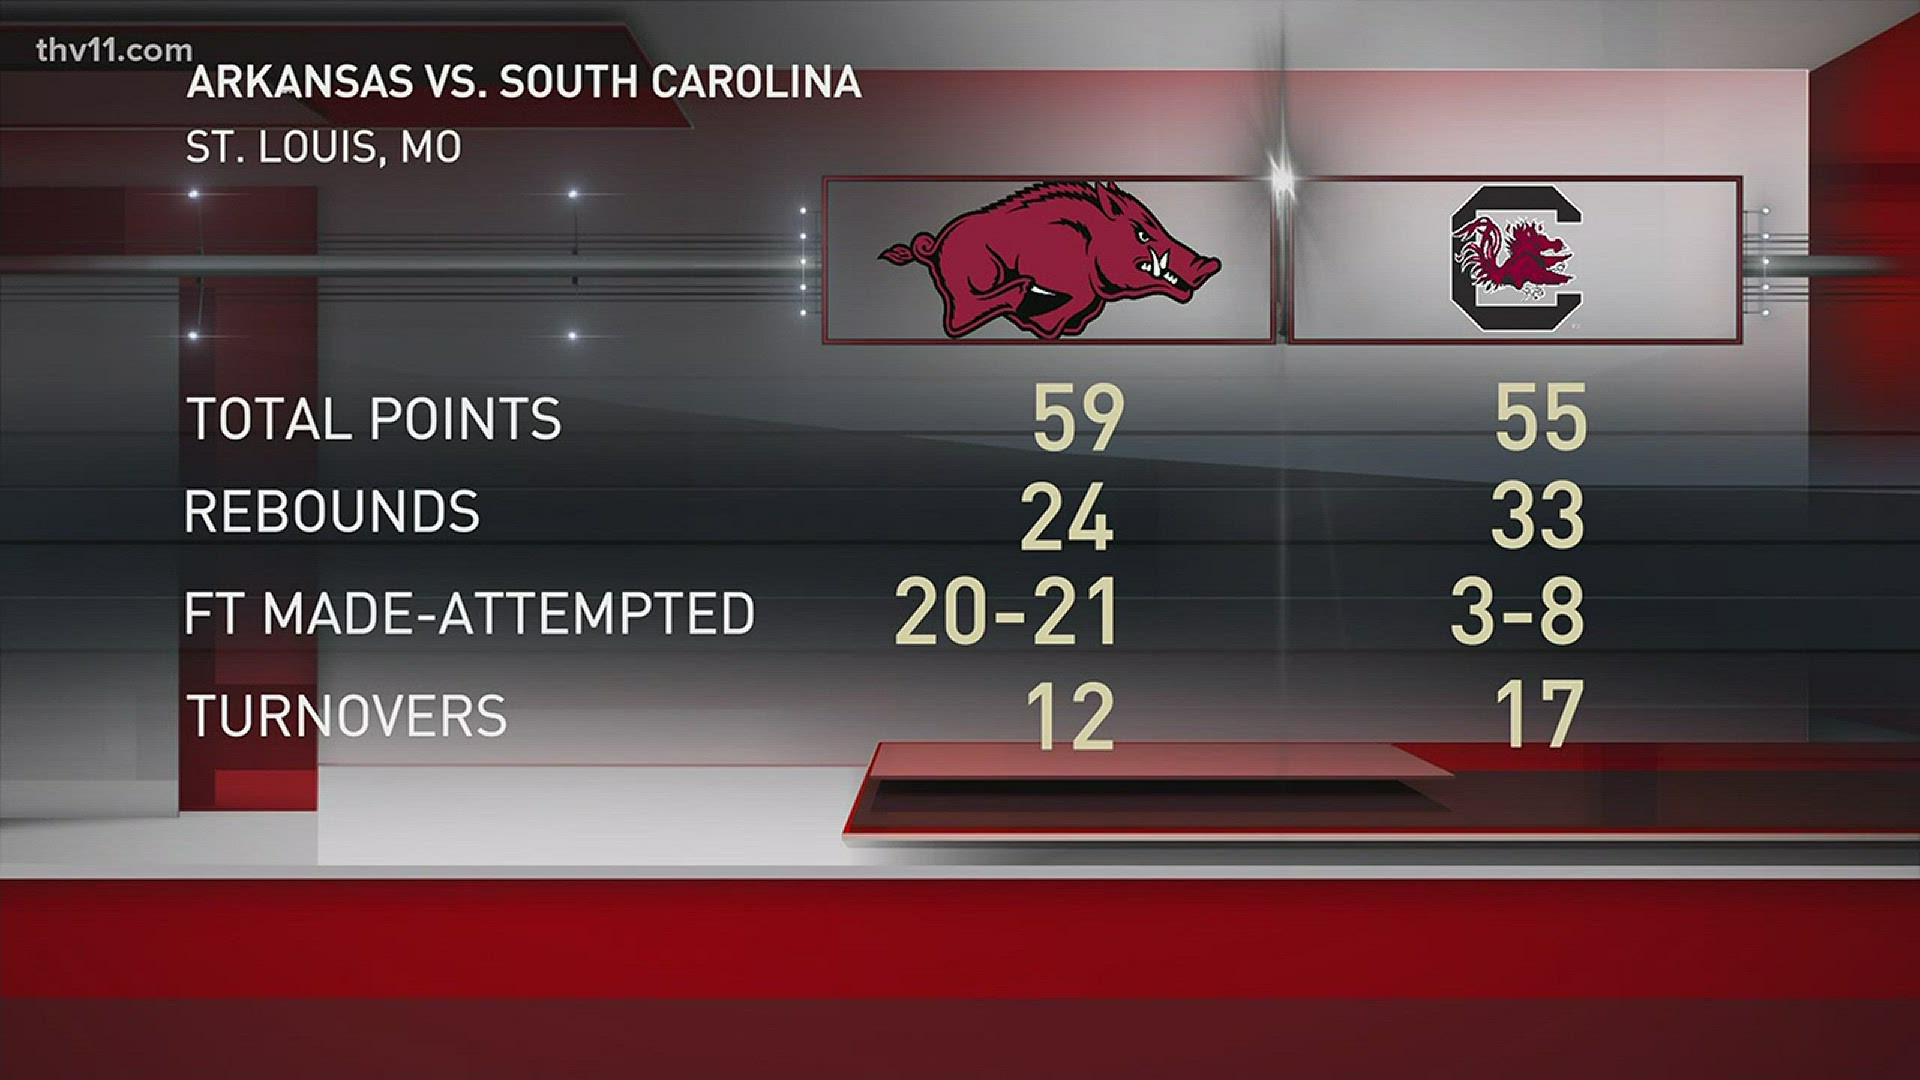 The Hogs were battling South Carolina to advance in the SEC tournament.